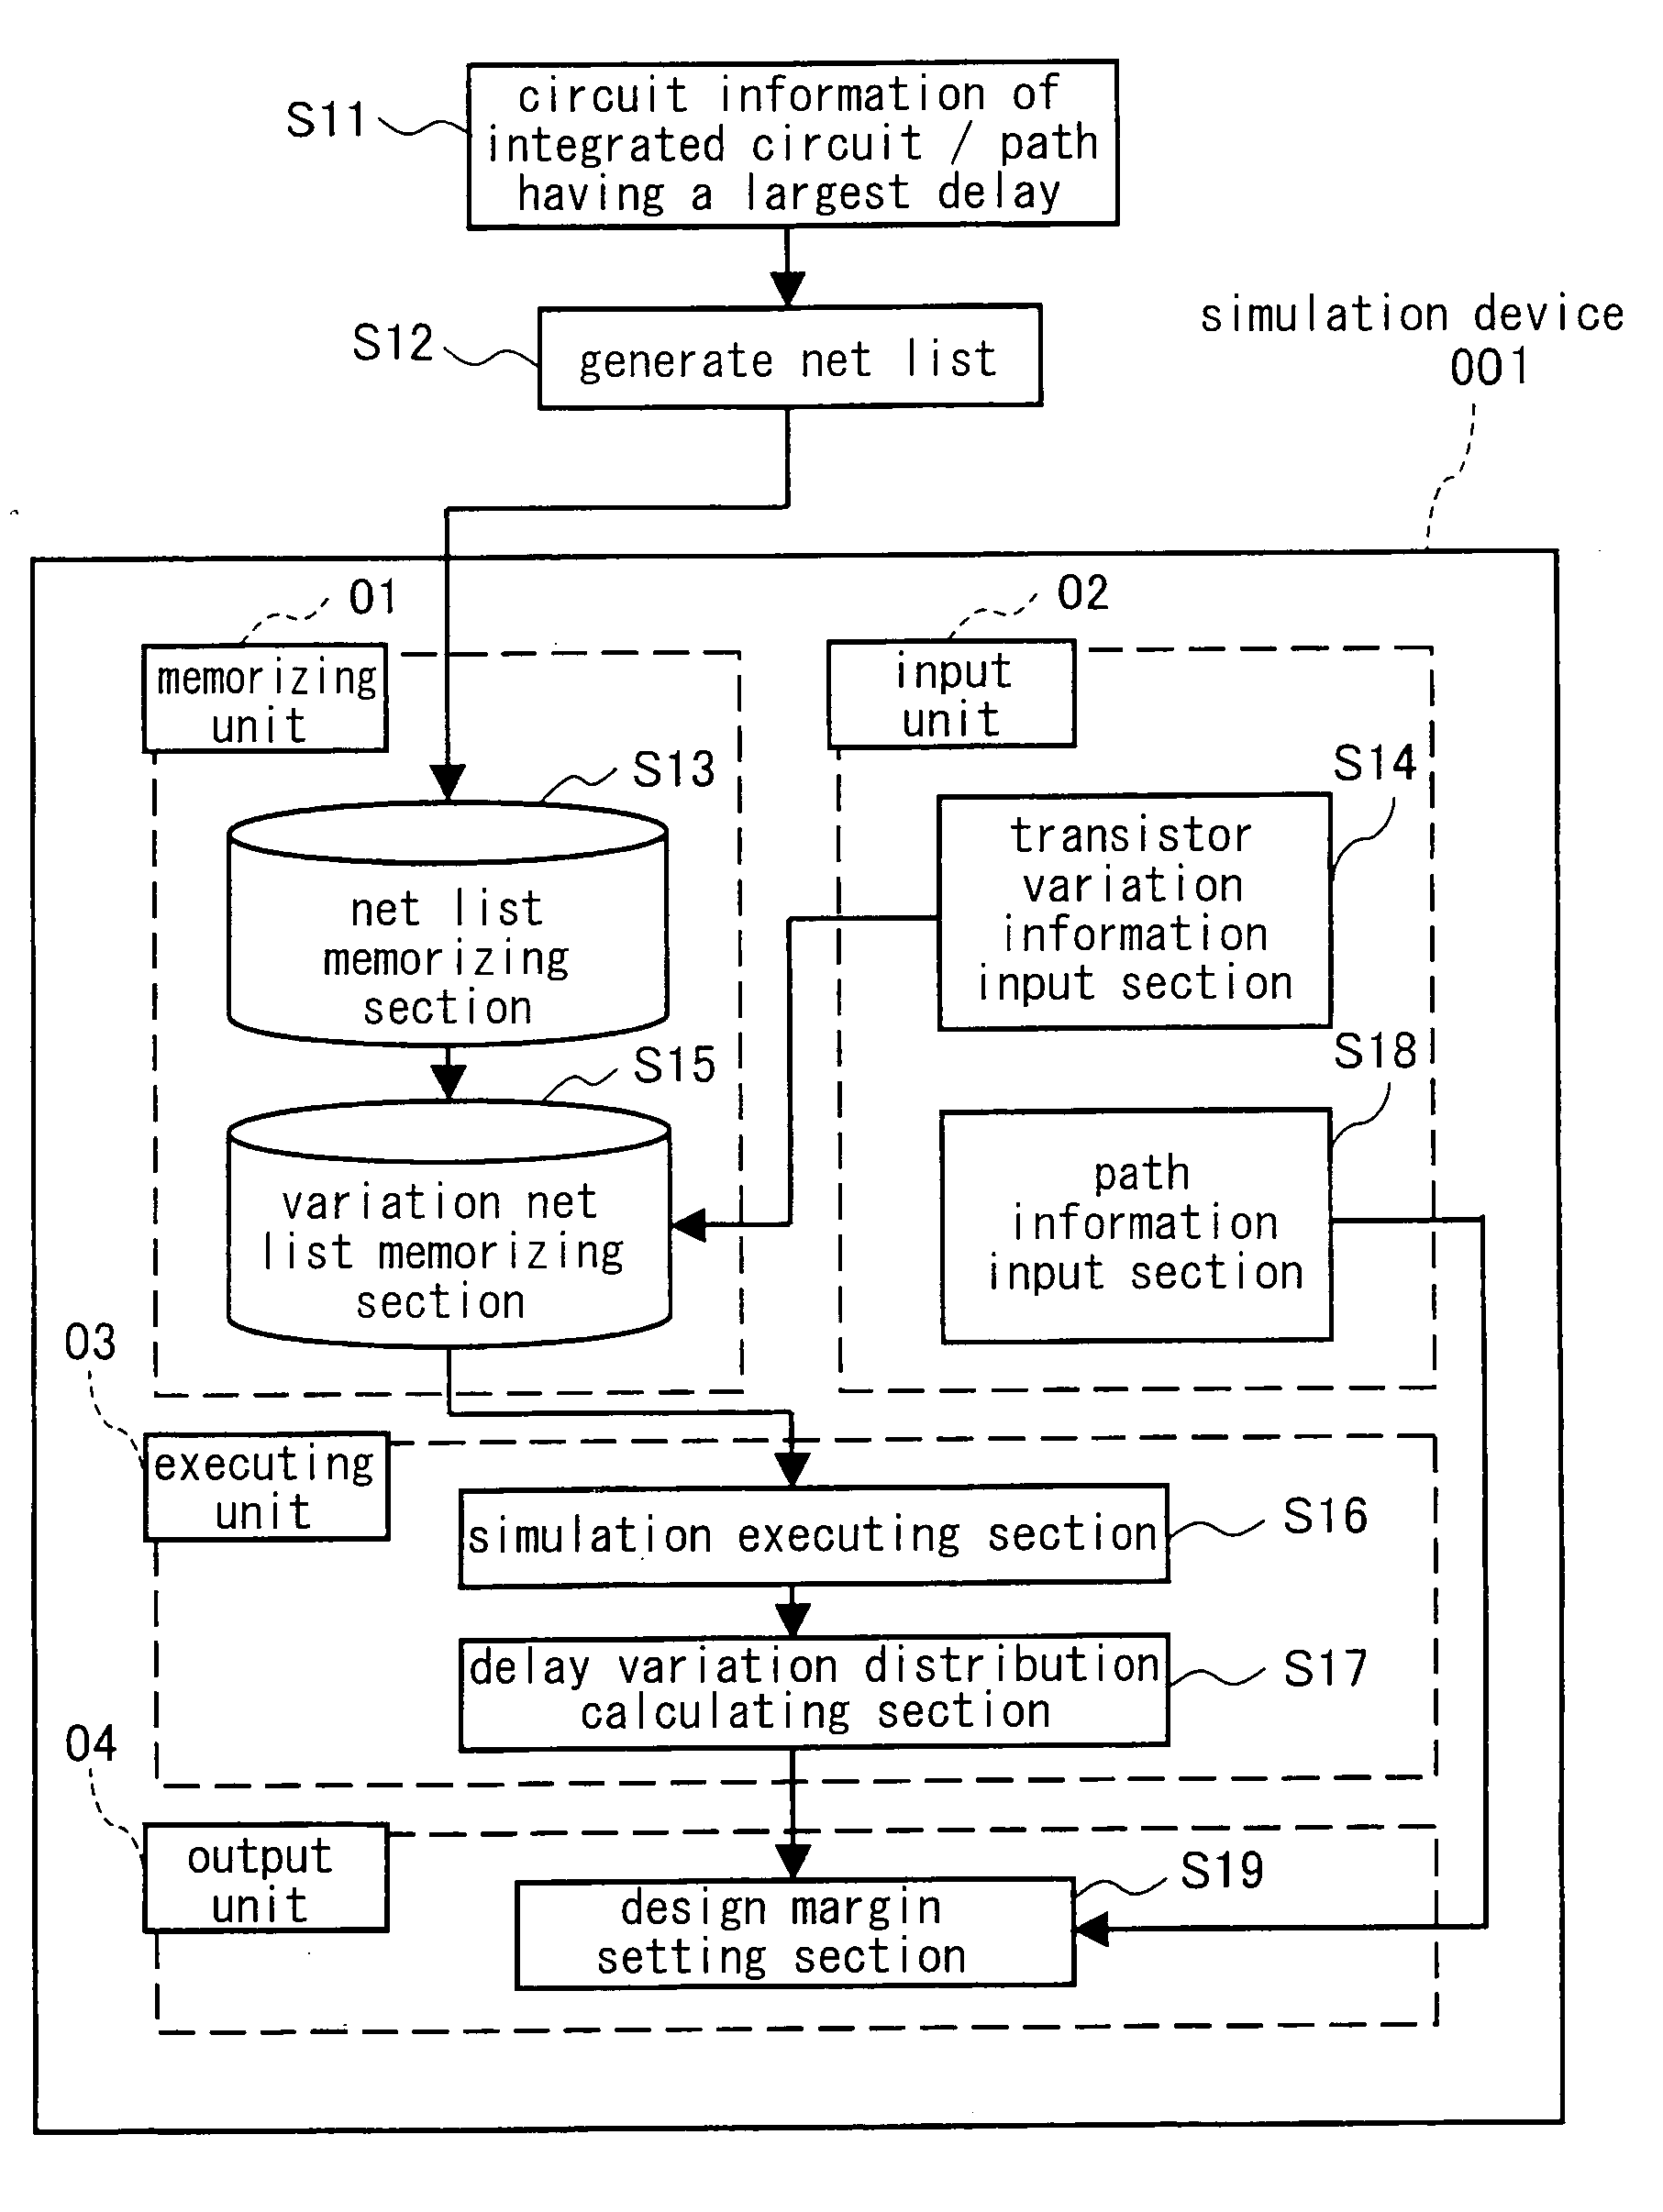 Simulation device for integrated circuit